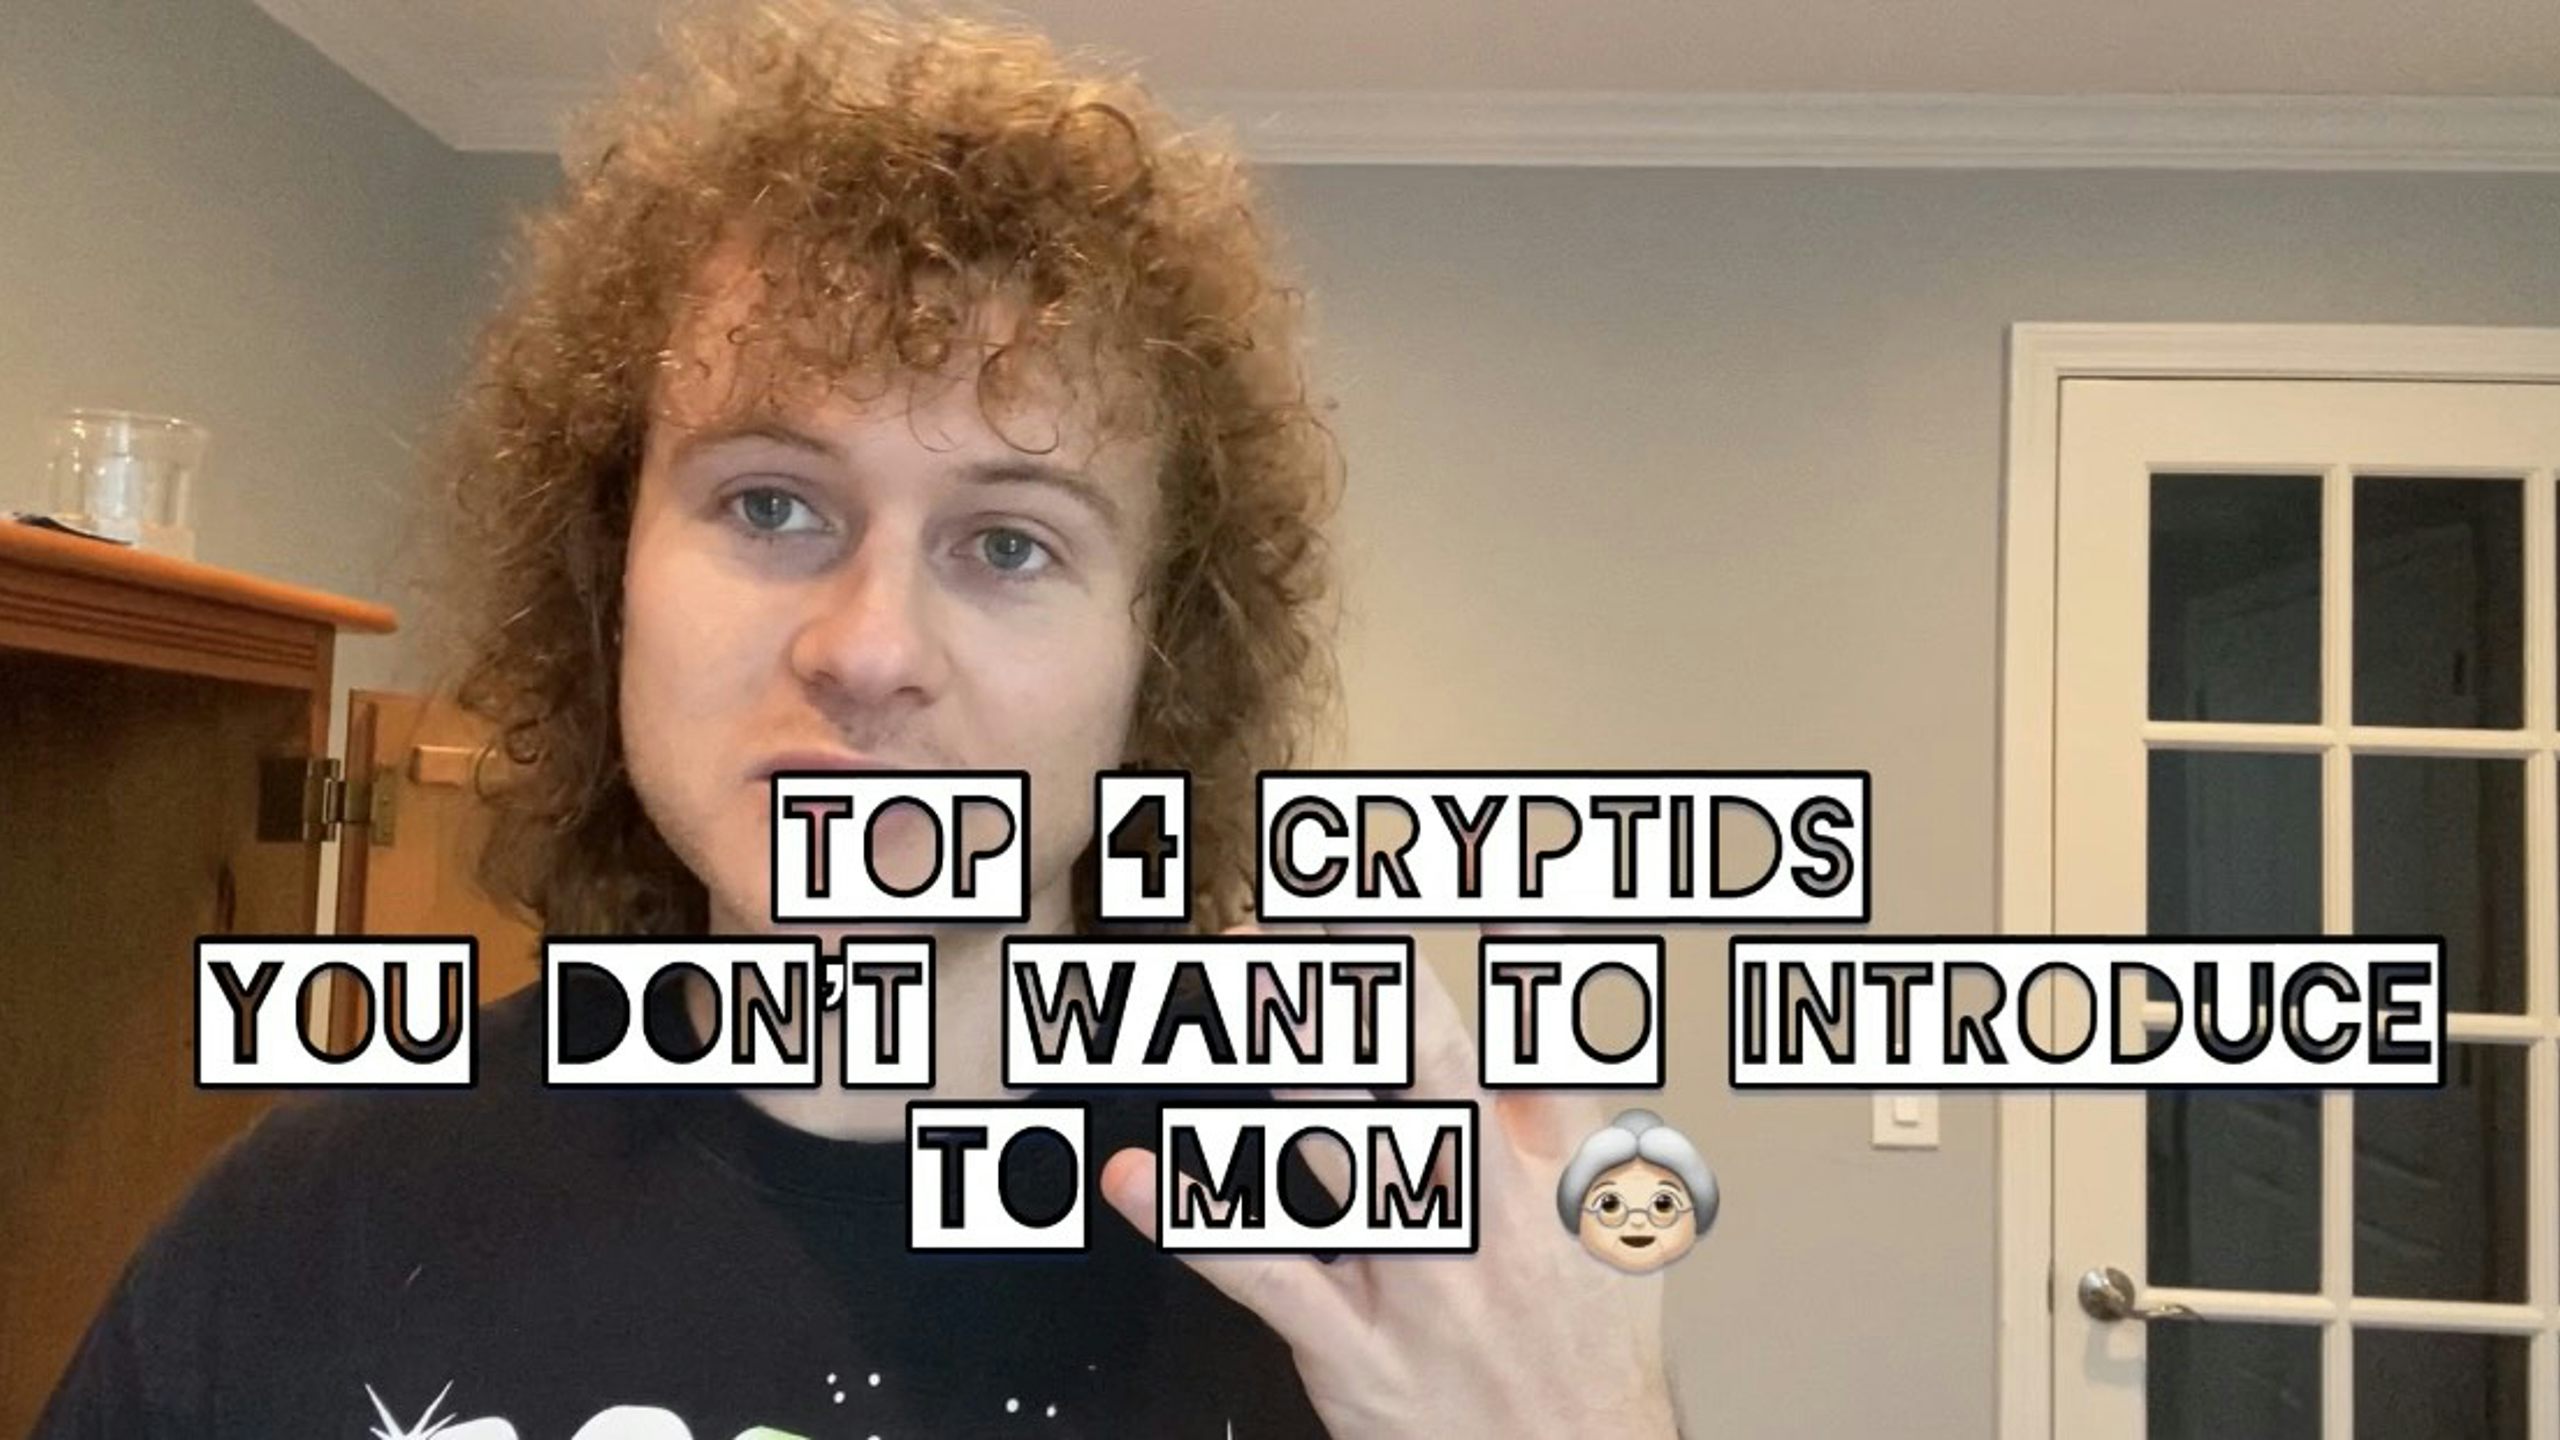 Top 4 Cryptids You DON'T Want to Introduce to Mom